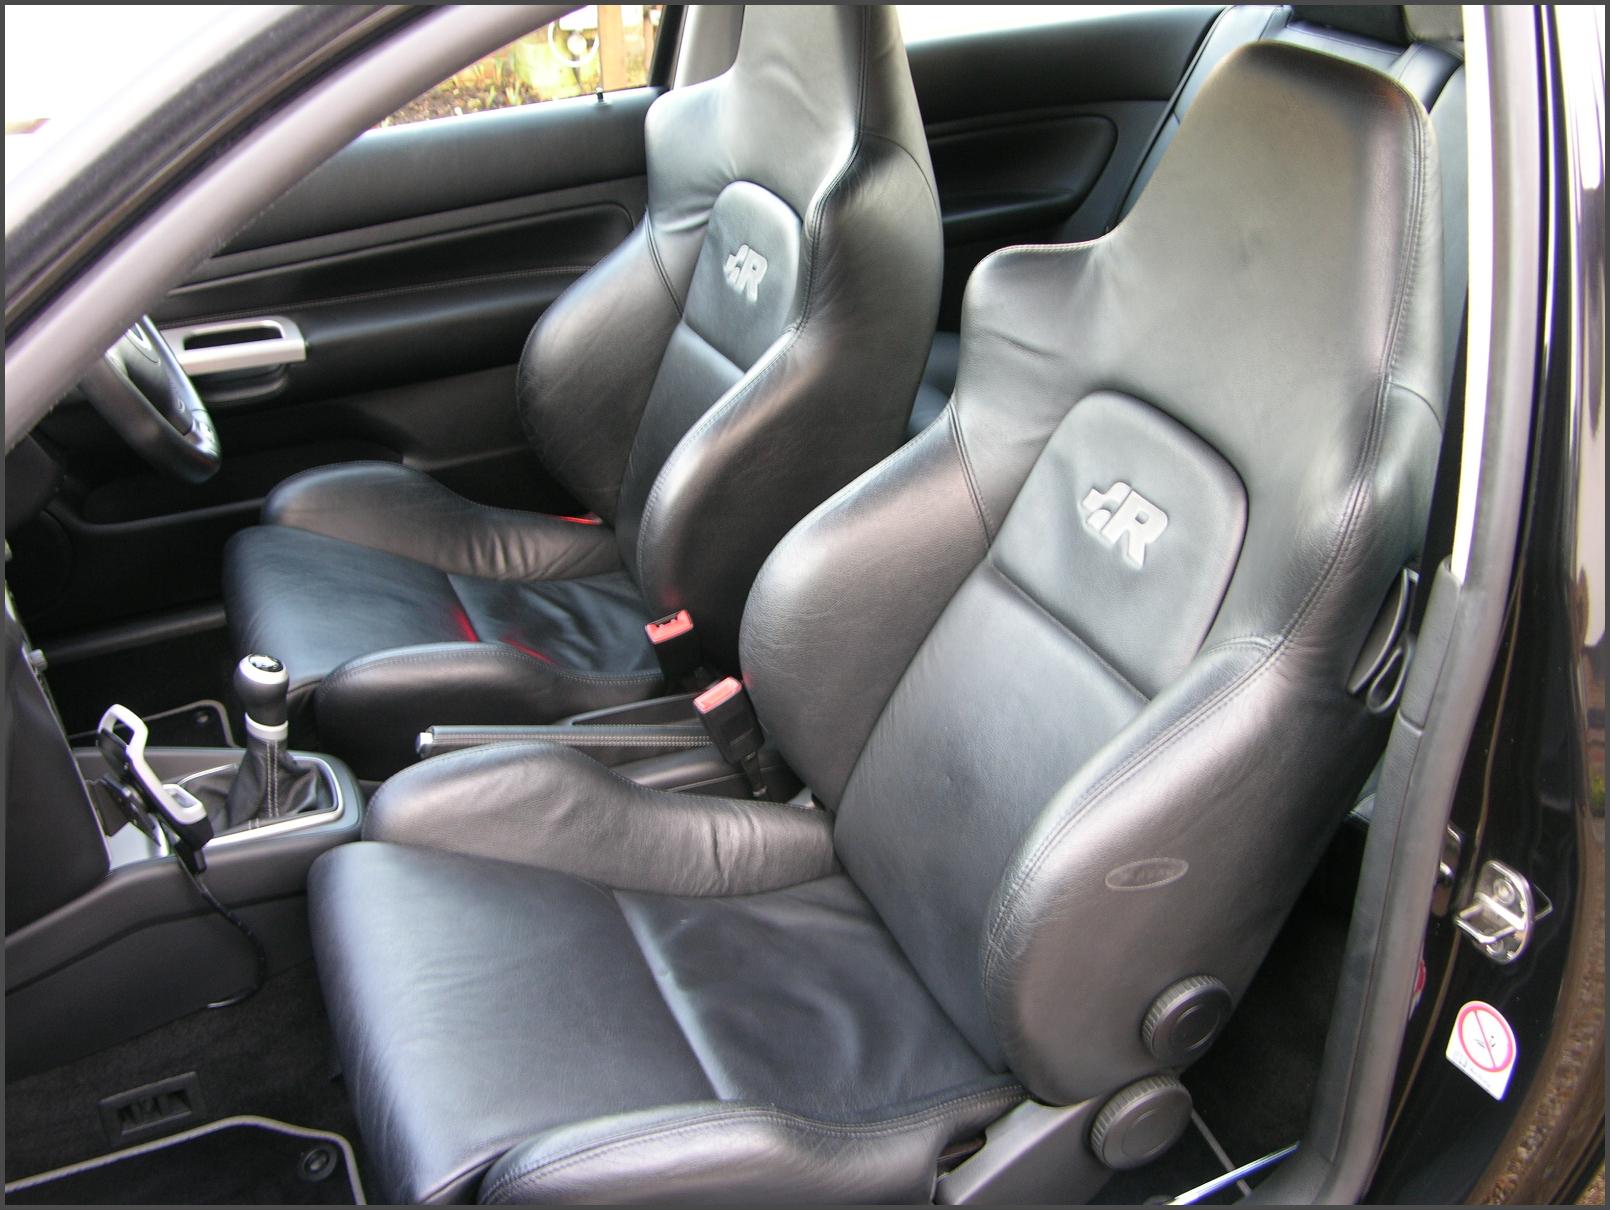 the interior of a vehicle with some black leather